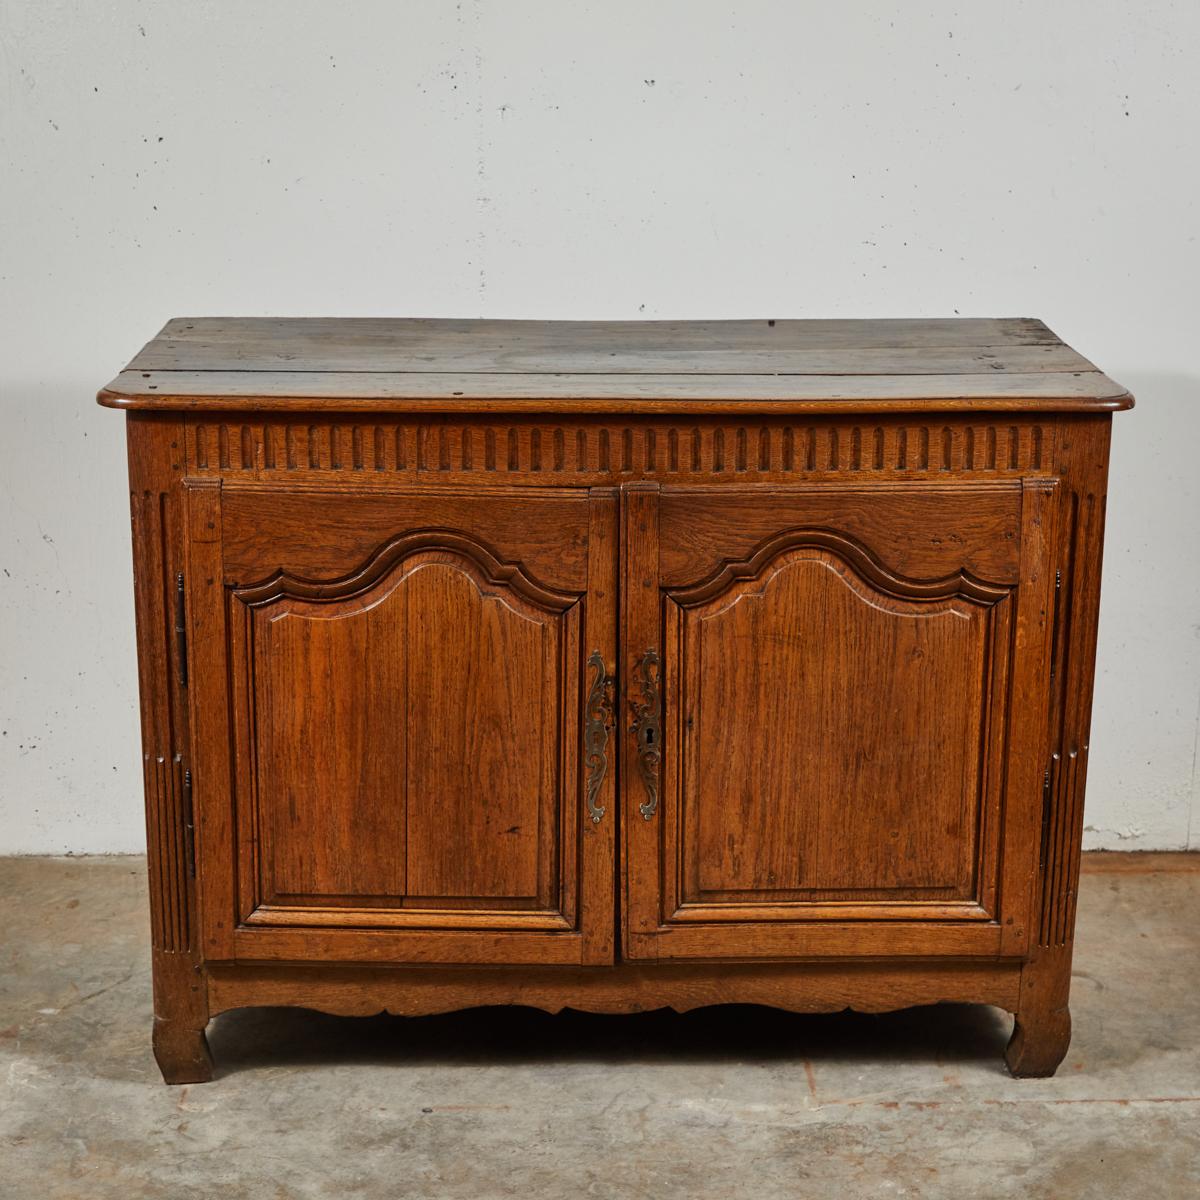 18th century Flemish provincial oak buffet with fluted carving, panel doors, and a carved apron base. Features a highly ornamented metal keyhole. 